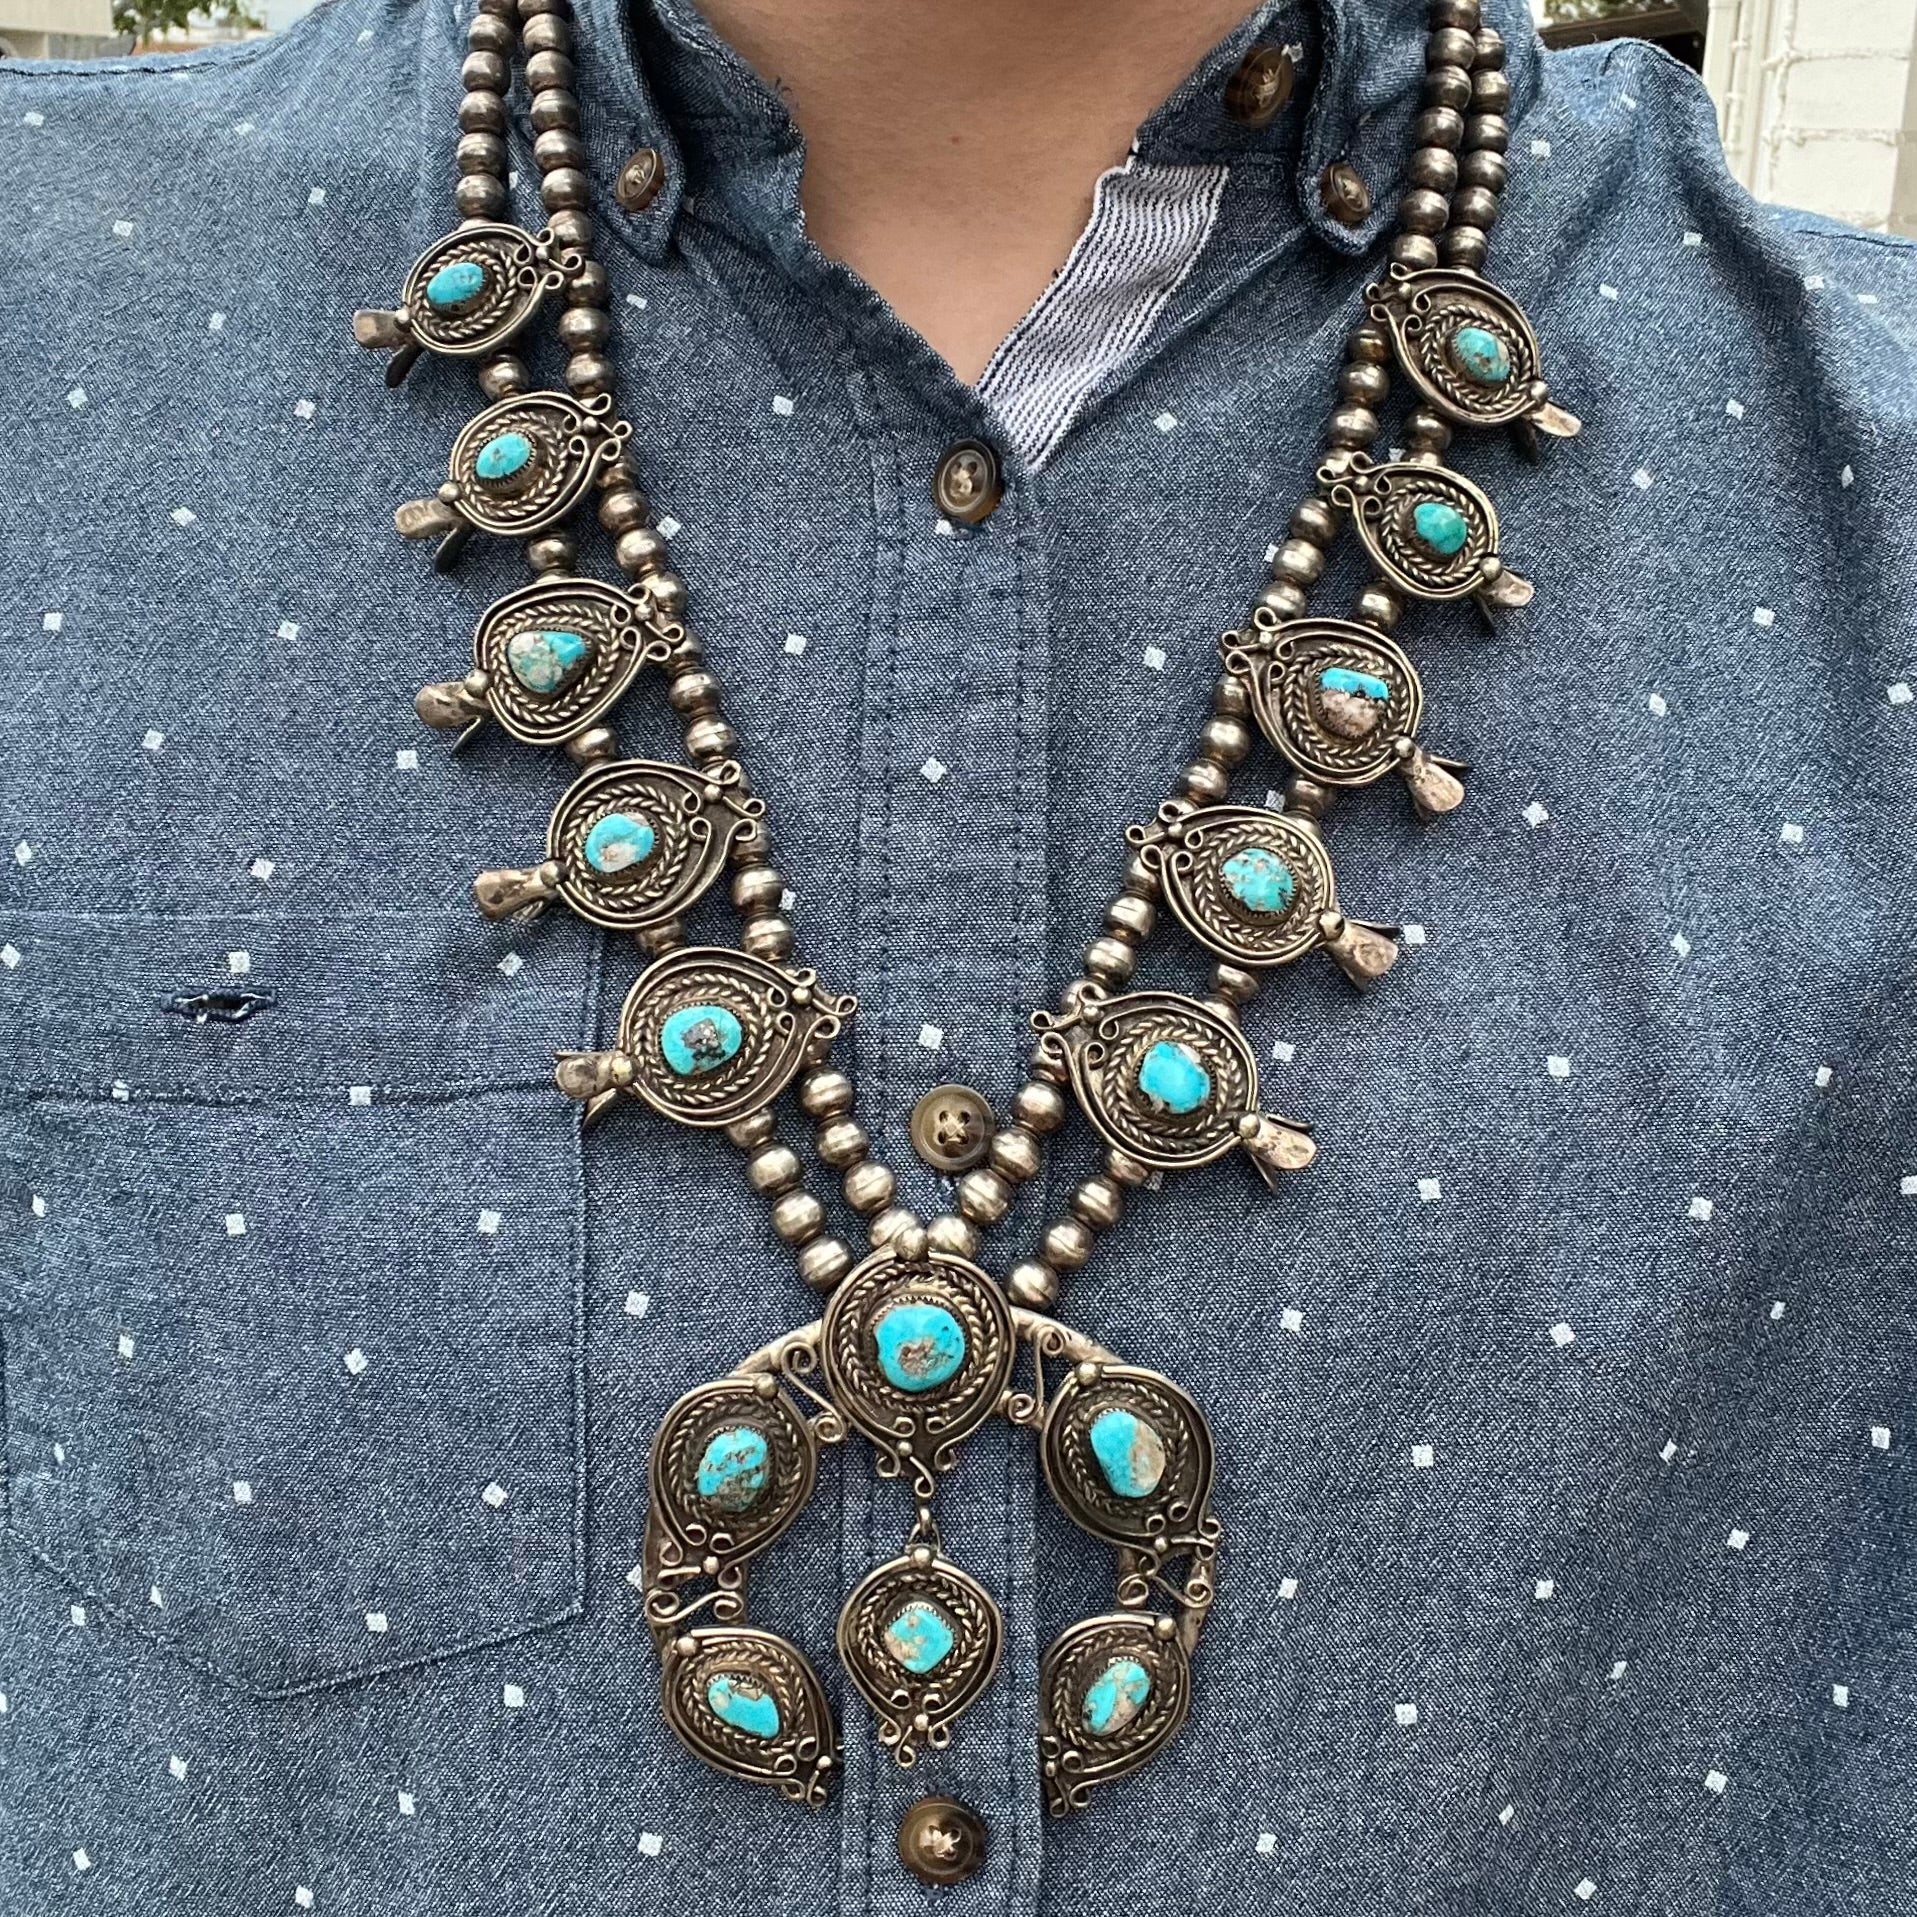 A men's Navajo silver squash blossom necklace set with Kingman turquoise stones.